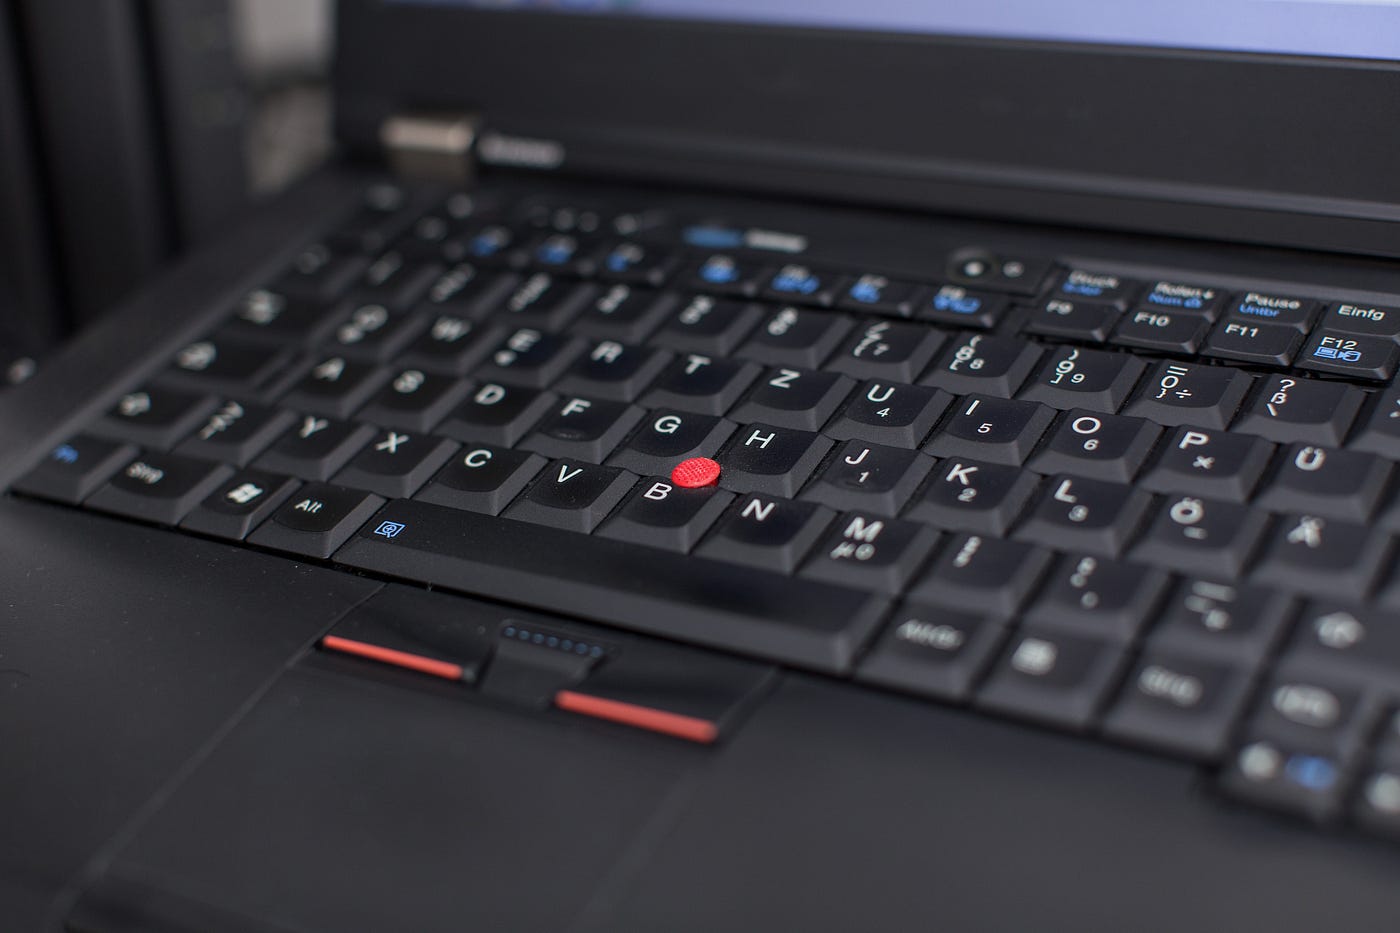 Your Guide to the ThinkPad procut lineup | The Startup